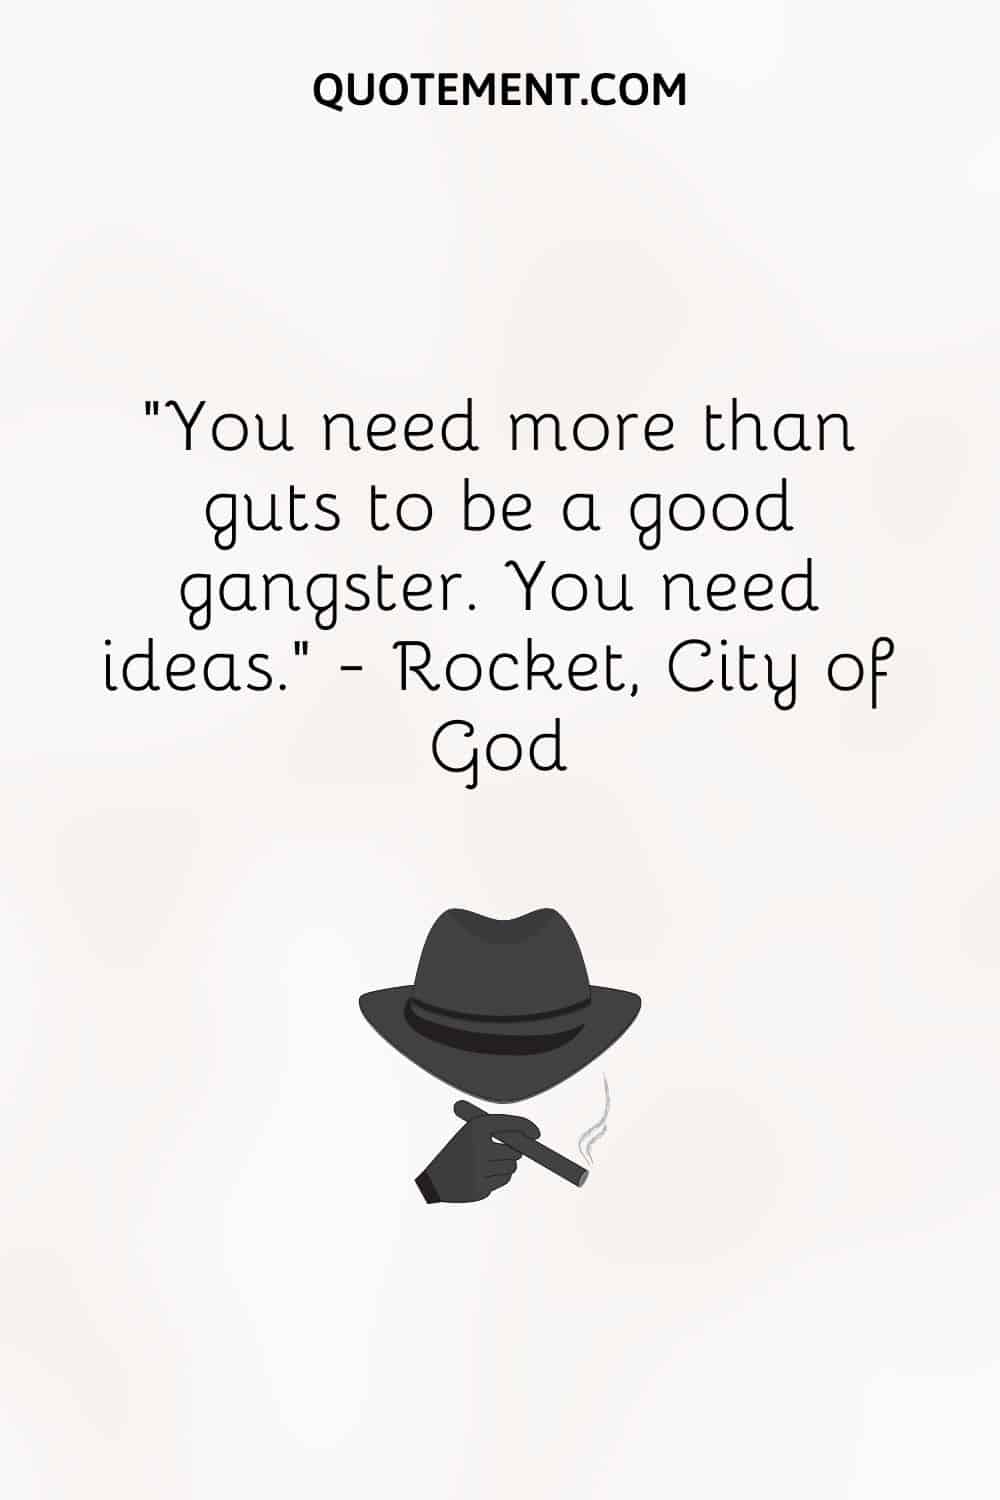 You need more than guts to be a good gangster